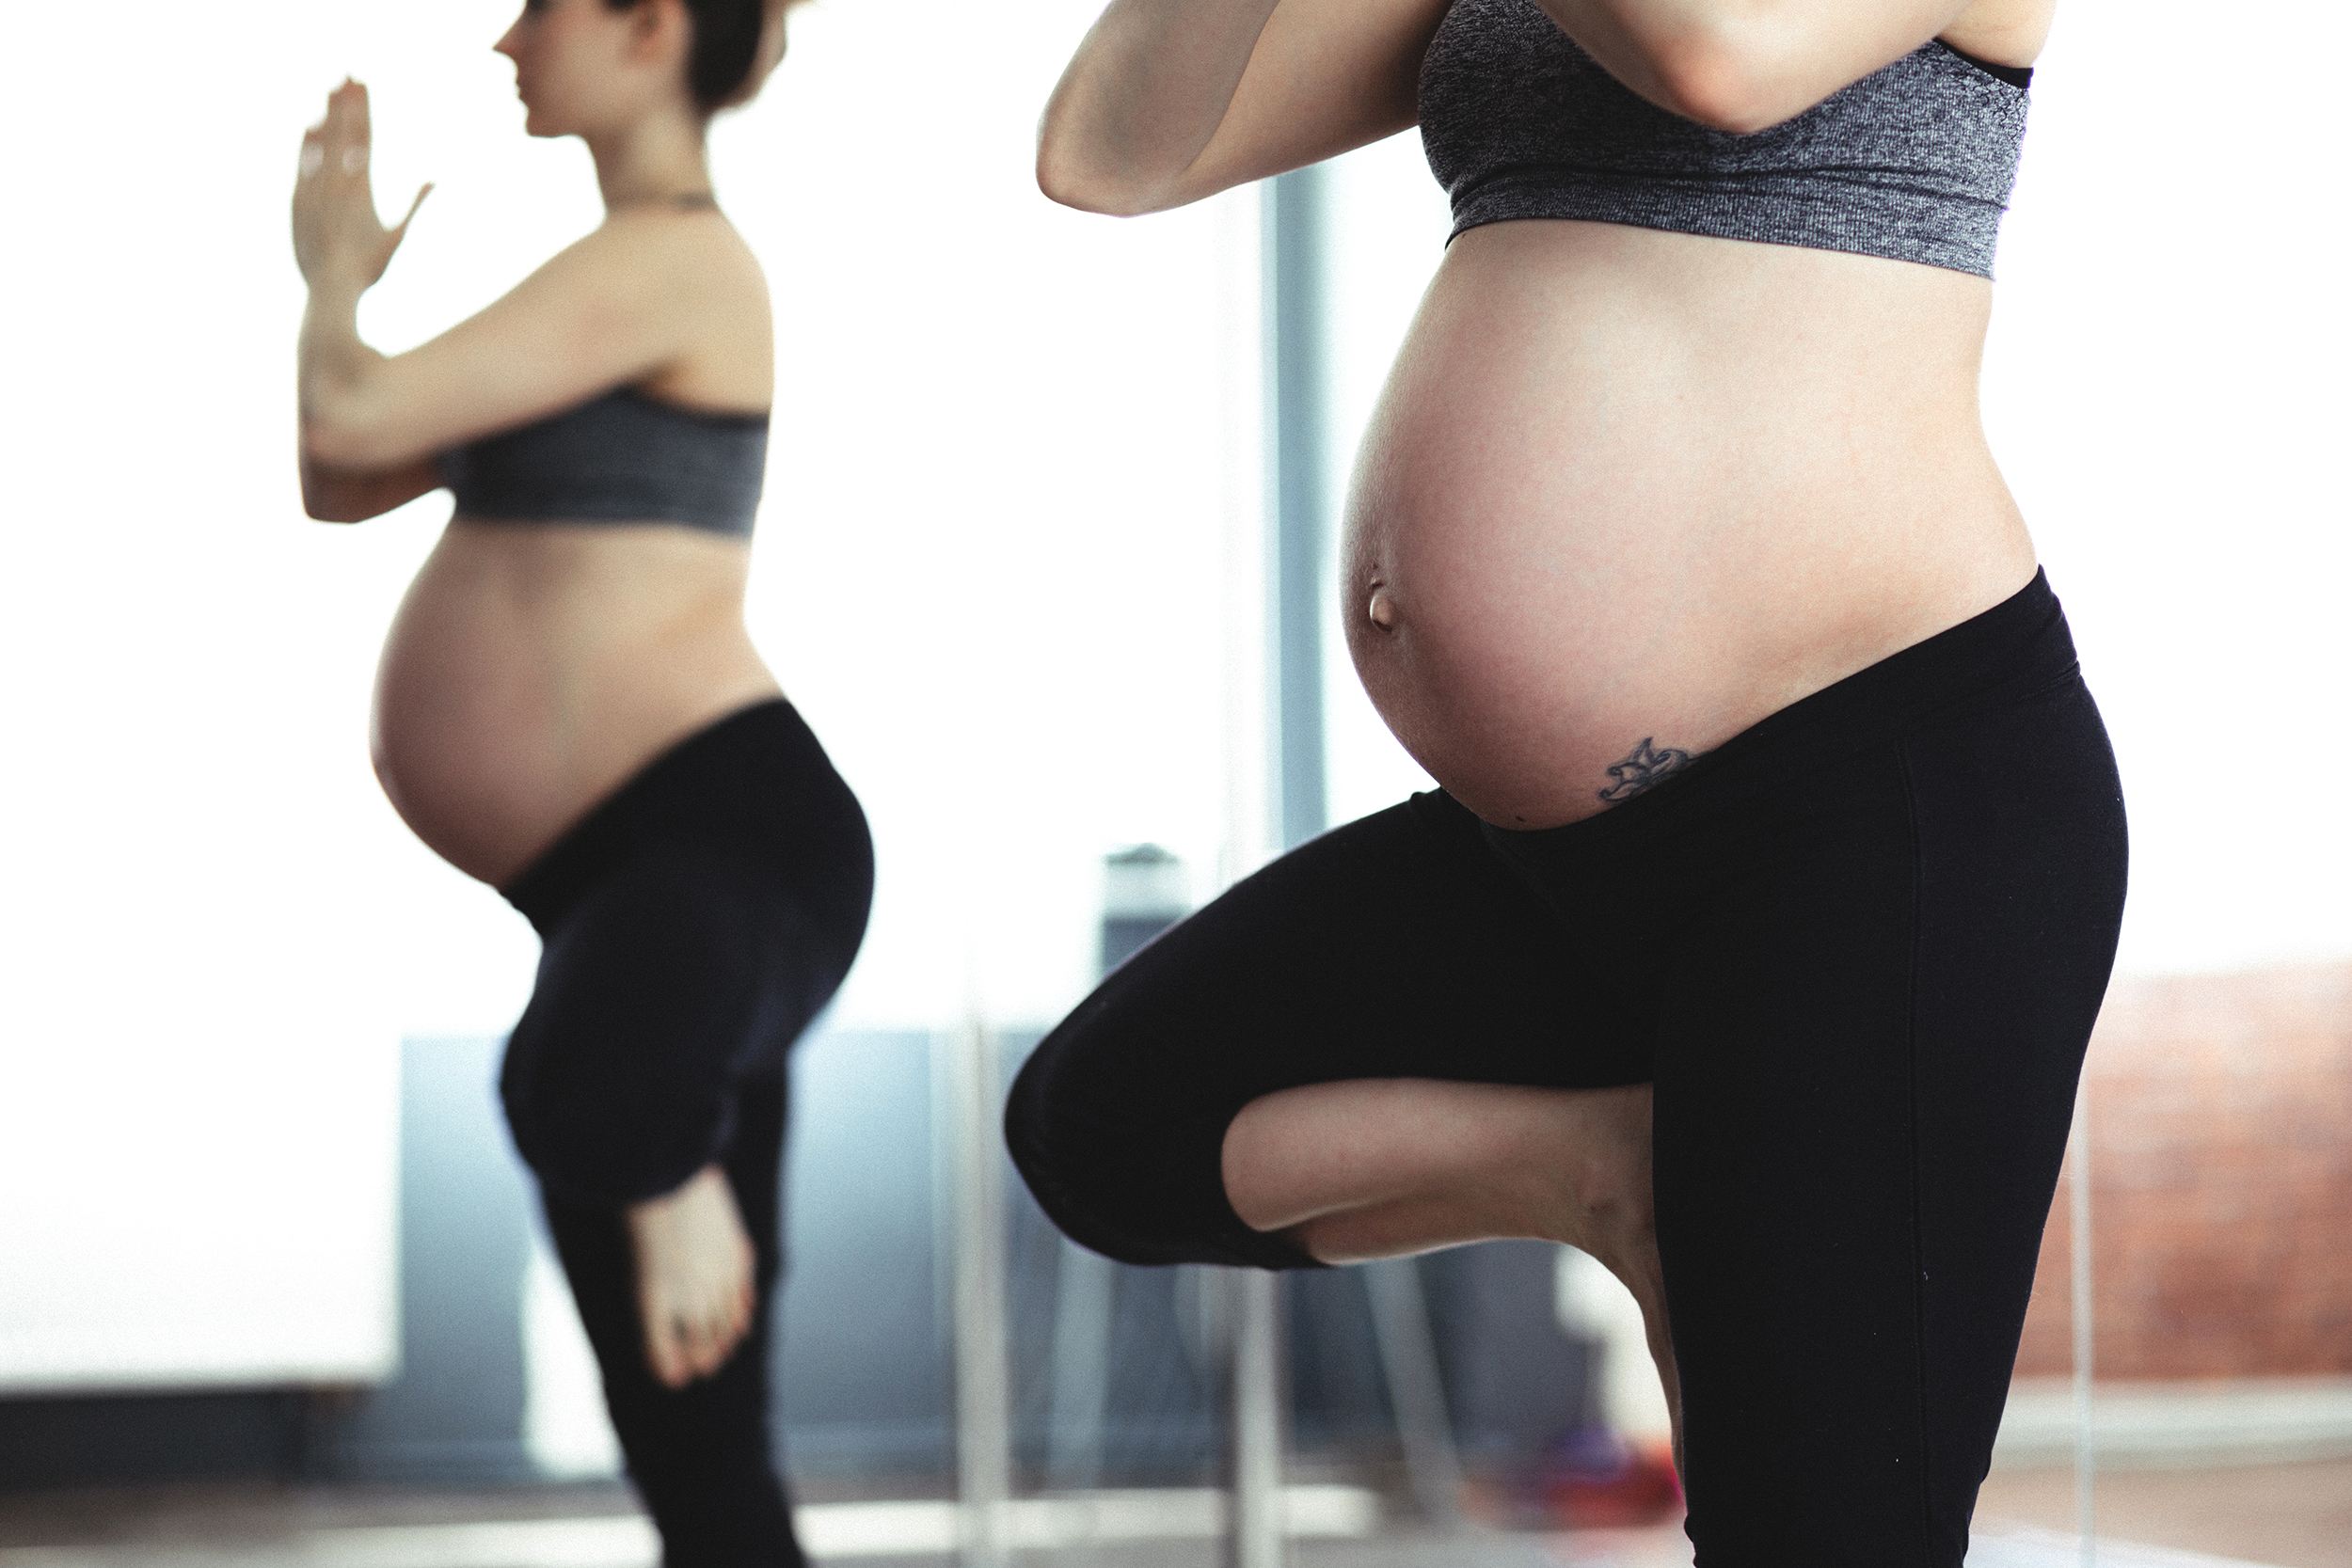 Exercise and Pregnancy